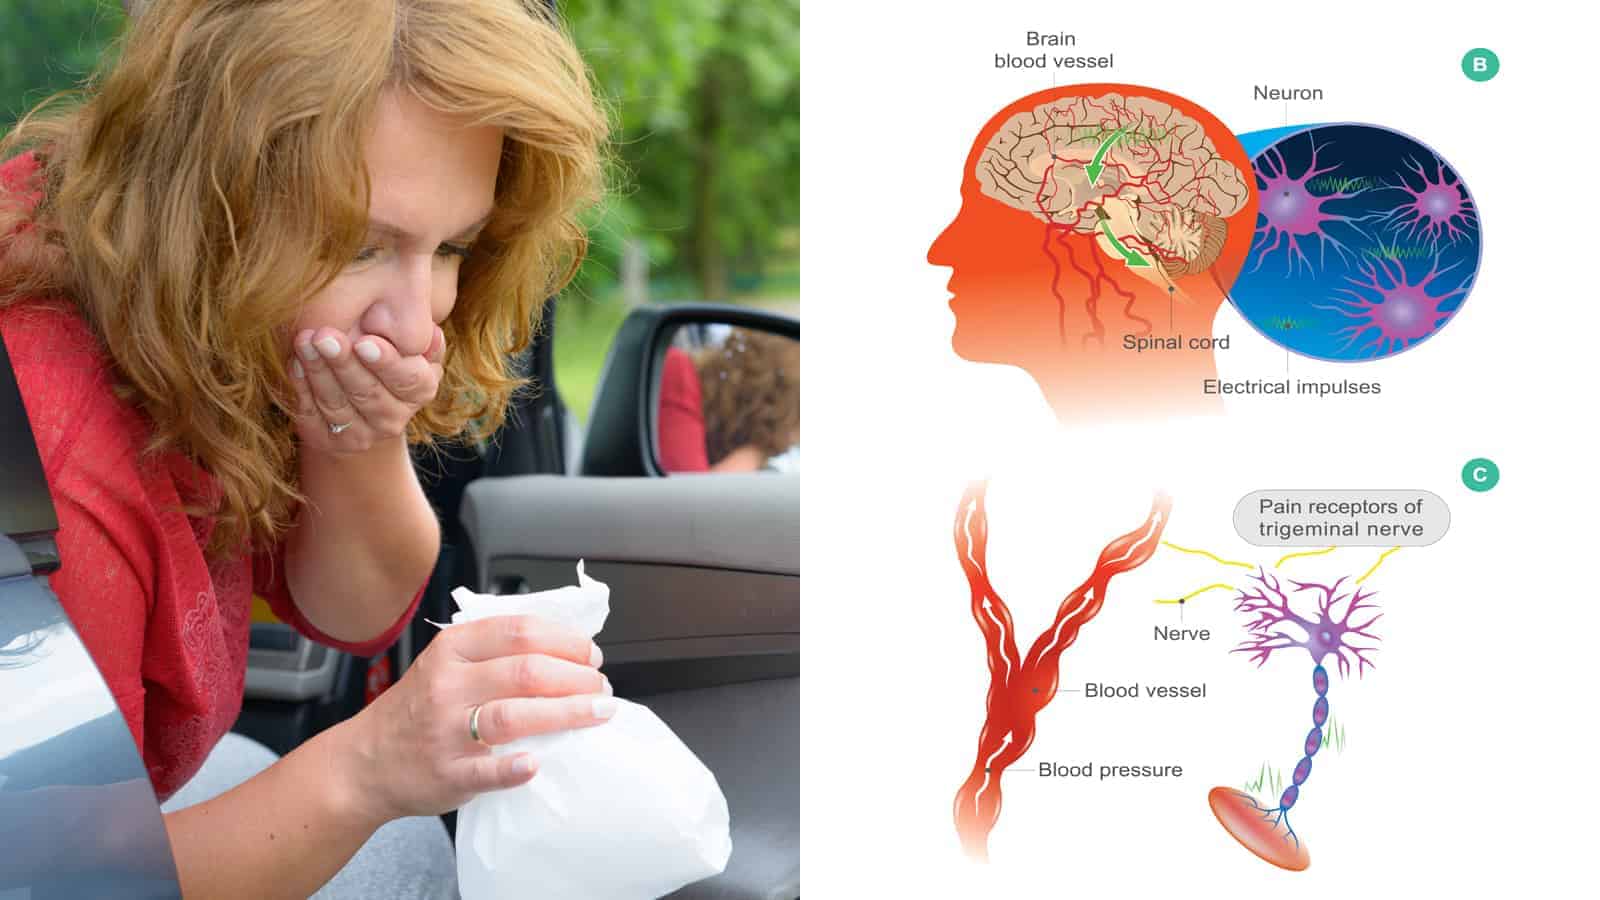 Neurologists Link Motion Sickness to an Increased Risk for Migraines